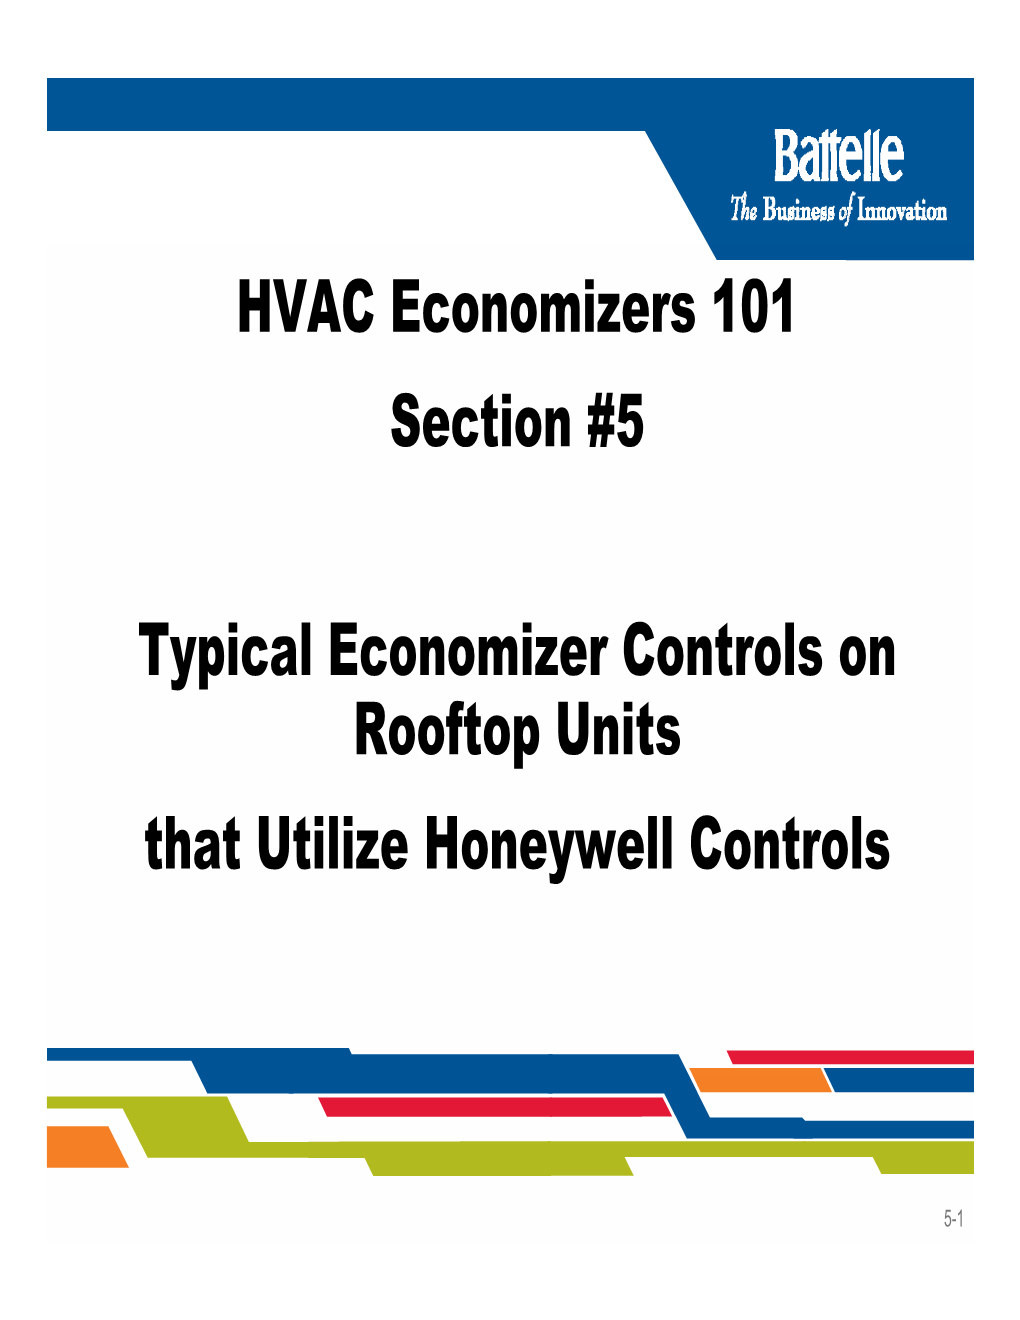 Typical Economizer Controls of Rooftop